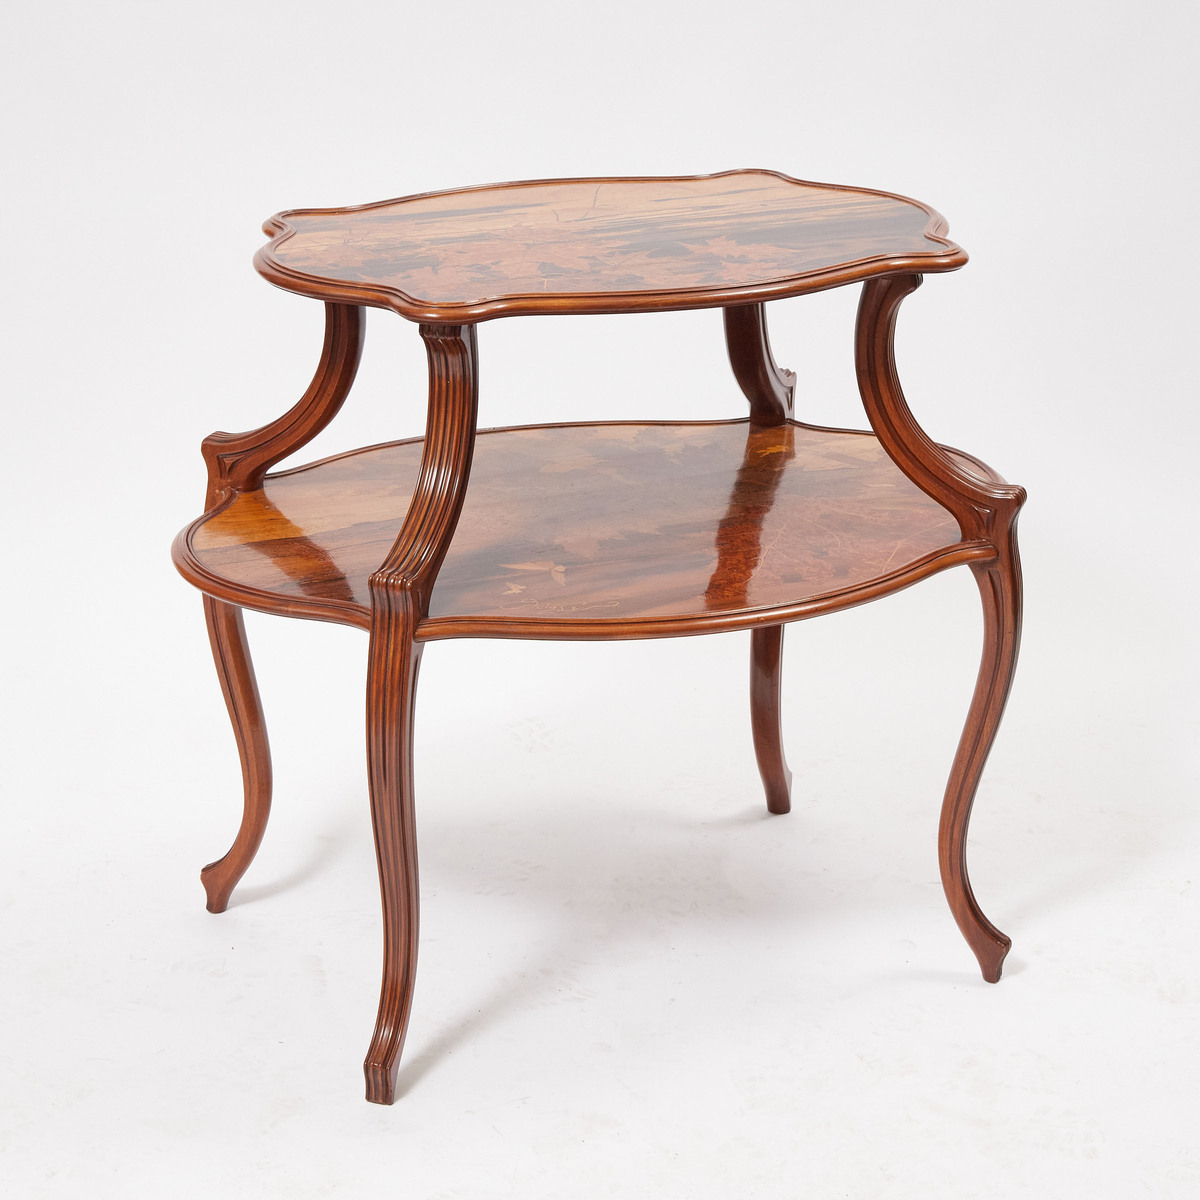 Émile Gallé Walnut, Fruit and Burl Wood Marquetry Two-Tier Tea Table, c.1890, 31.5 x 35.5 x 27 in —